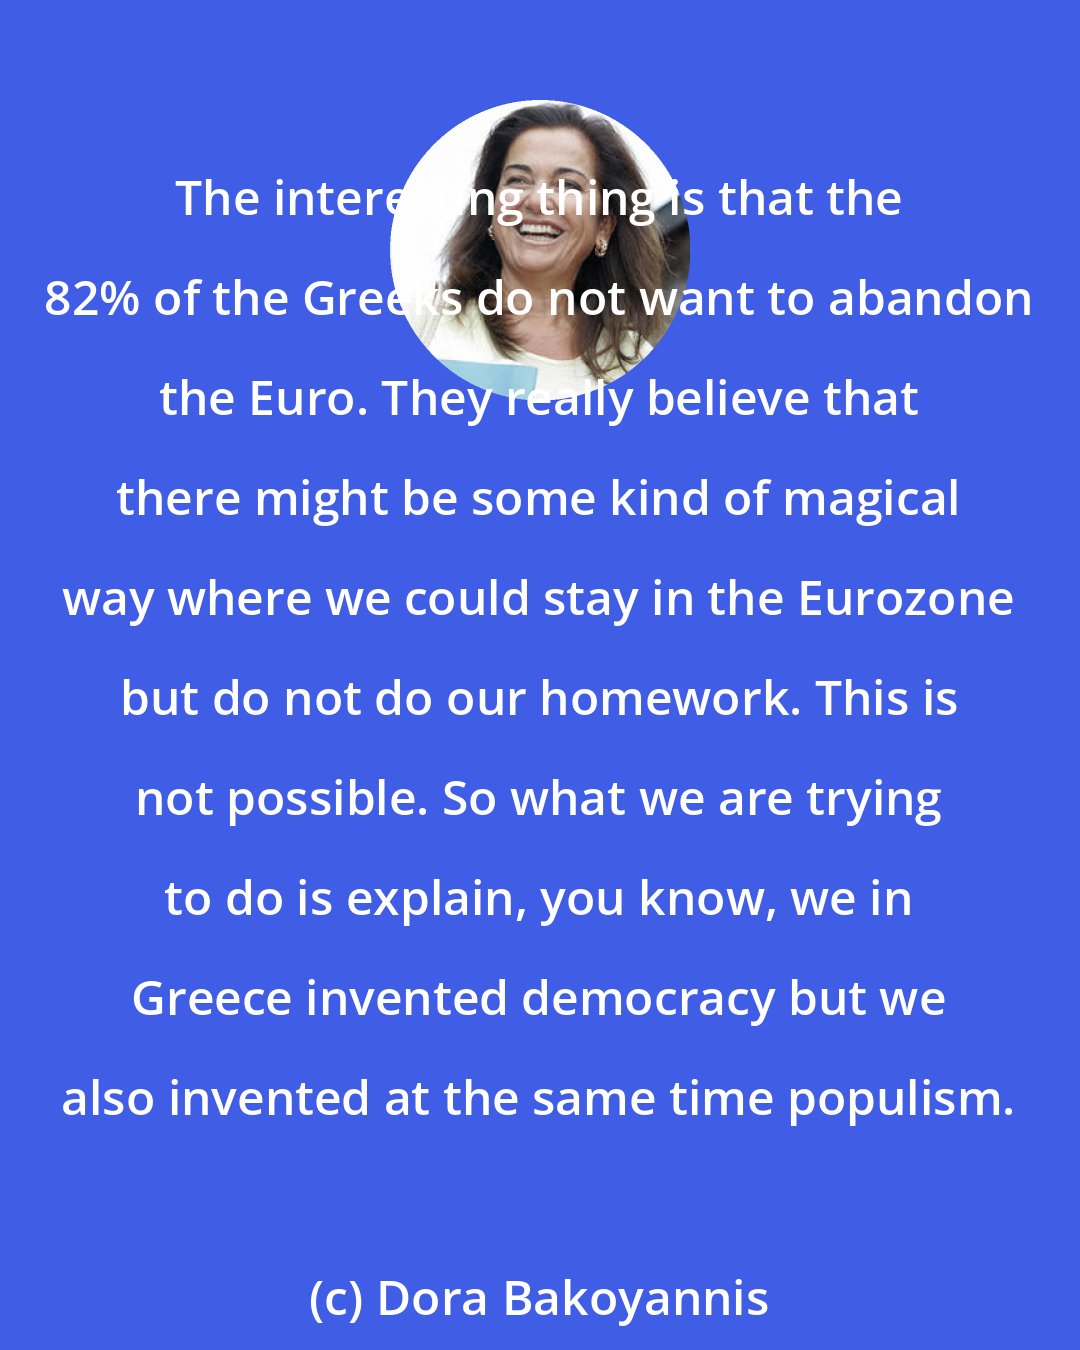 Dora Bakoyannis: The interesting thing is that the 82% of the Greeks do not want to abandon the Euro. They really believe that there might be some kind of magical way where we could stay in the Eurozone but do not do our homework. This is not possible. So what we are trying to do is explain, you know, we in Greece invented democracy but we also invented at the same time populism.